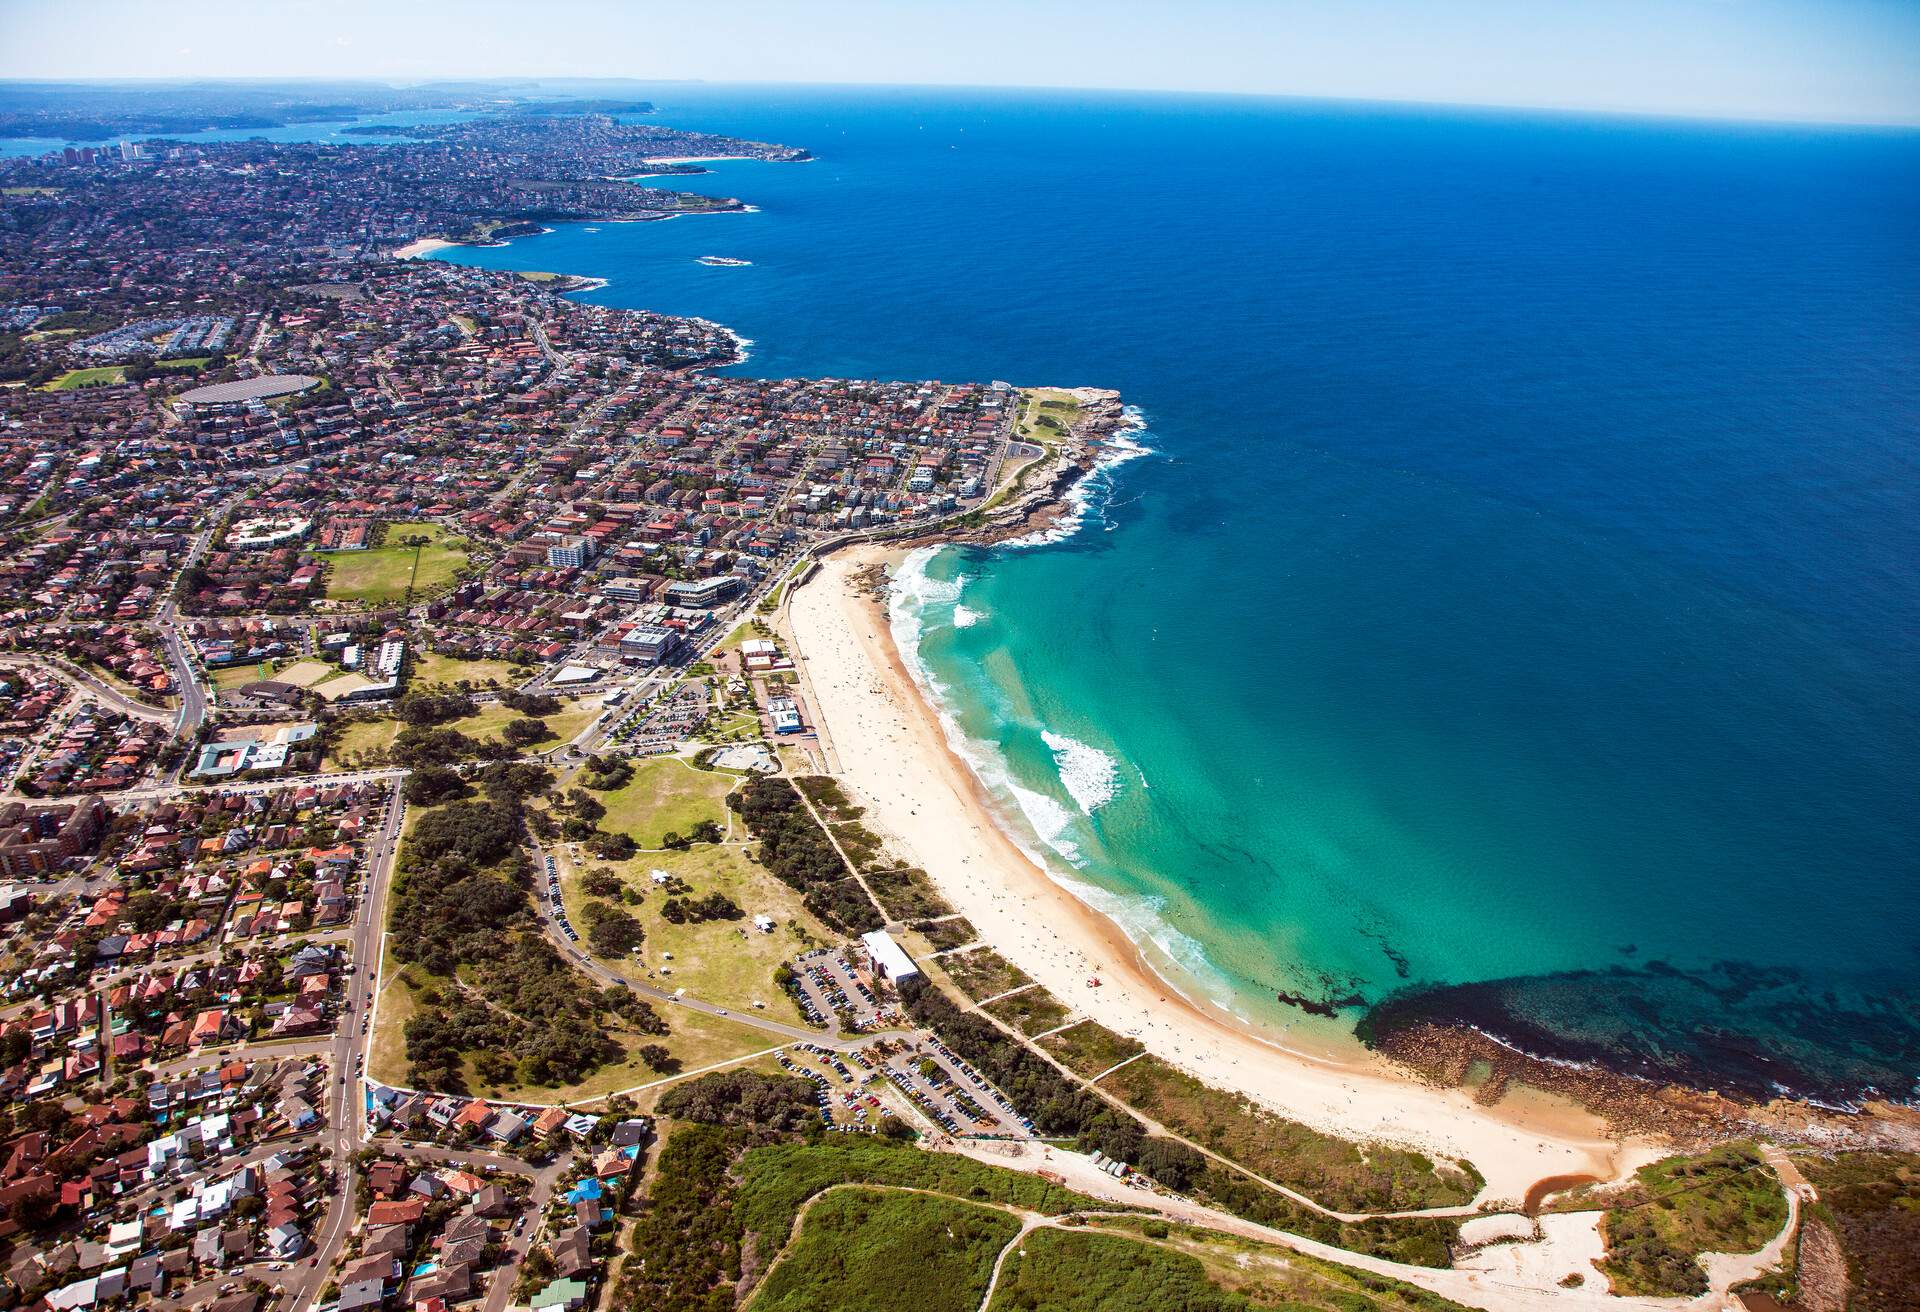 DEST_AUSTRALIA_NEW-SOUTH-WALES_MAROUBRA_GettyImages-468994225